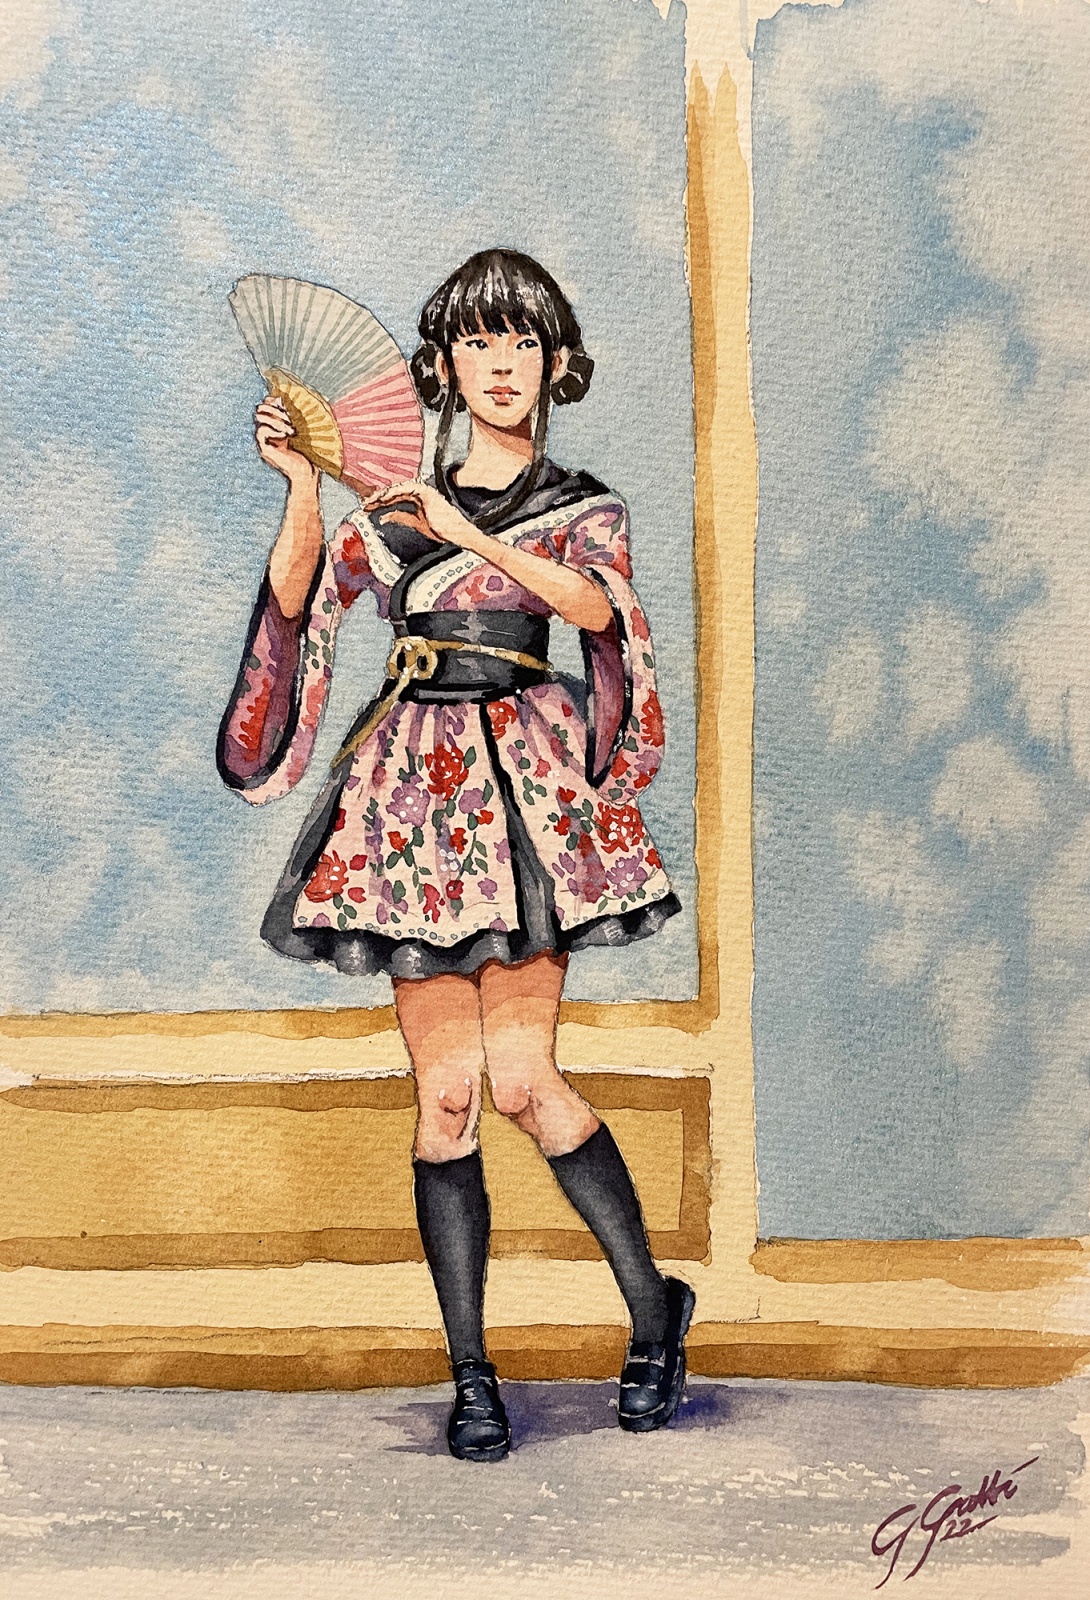 Japanese girl with a fan - watercolour on paper
41x31 cm